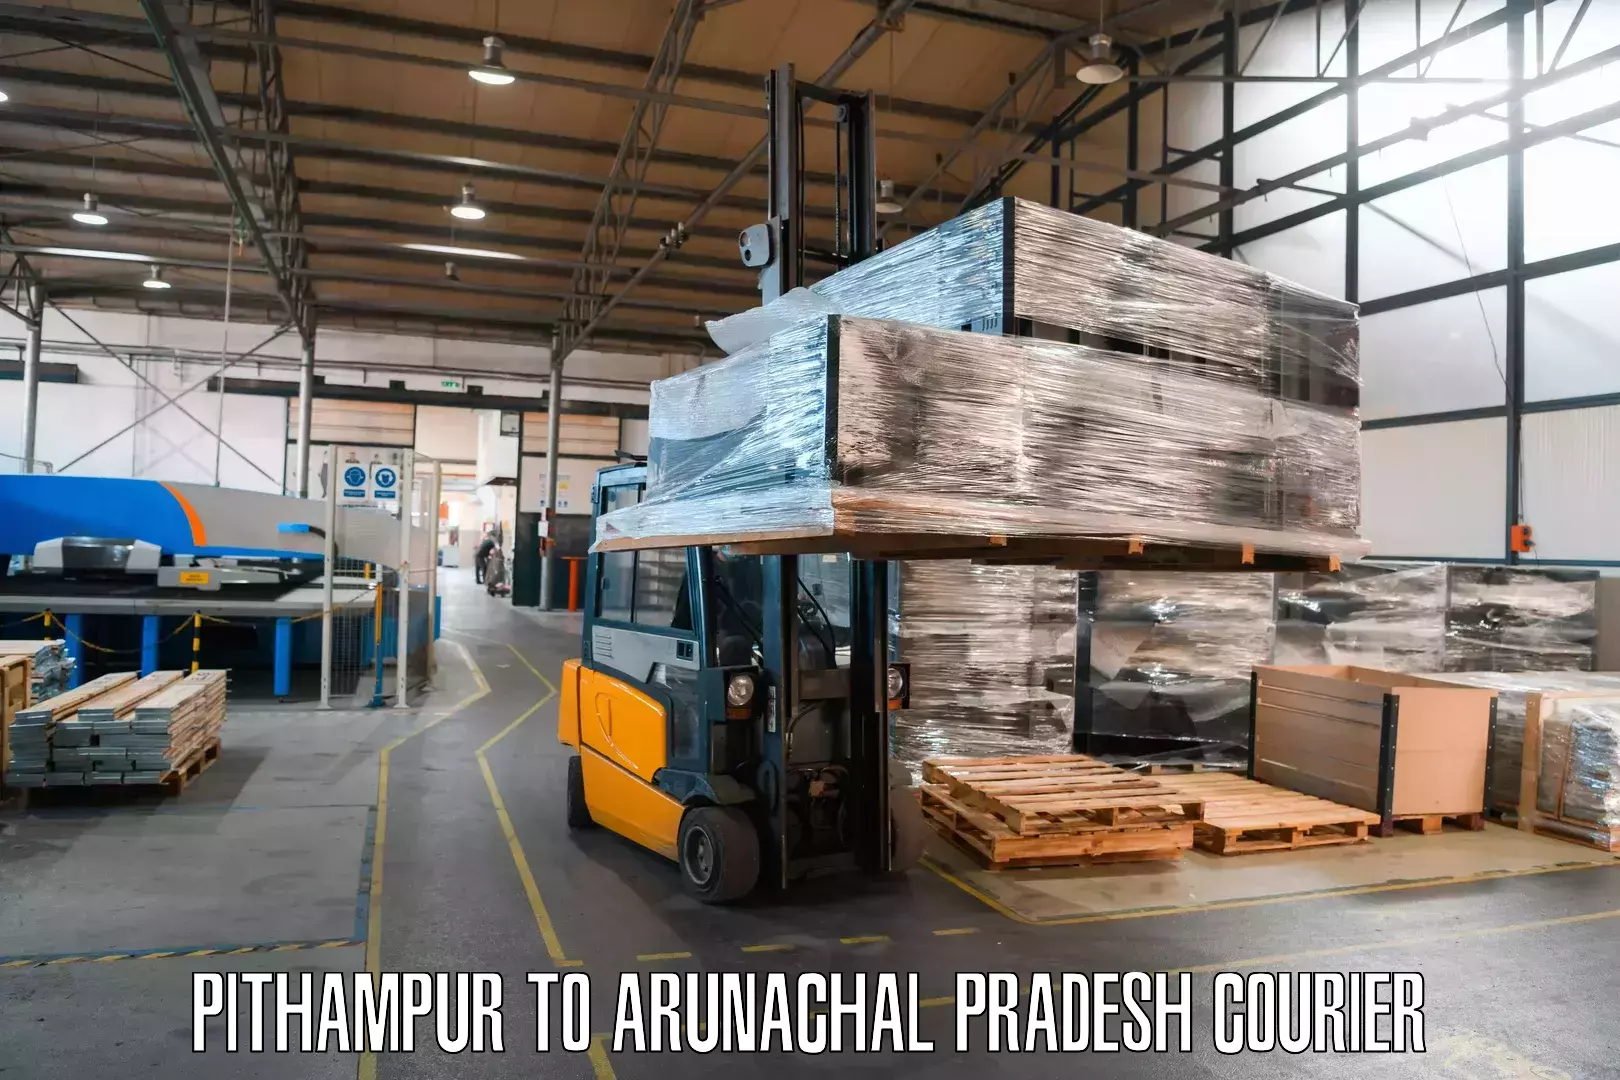 Global parcel delivery Pithampur to Lohit